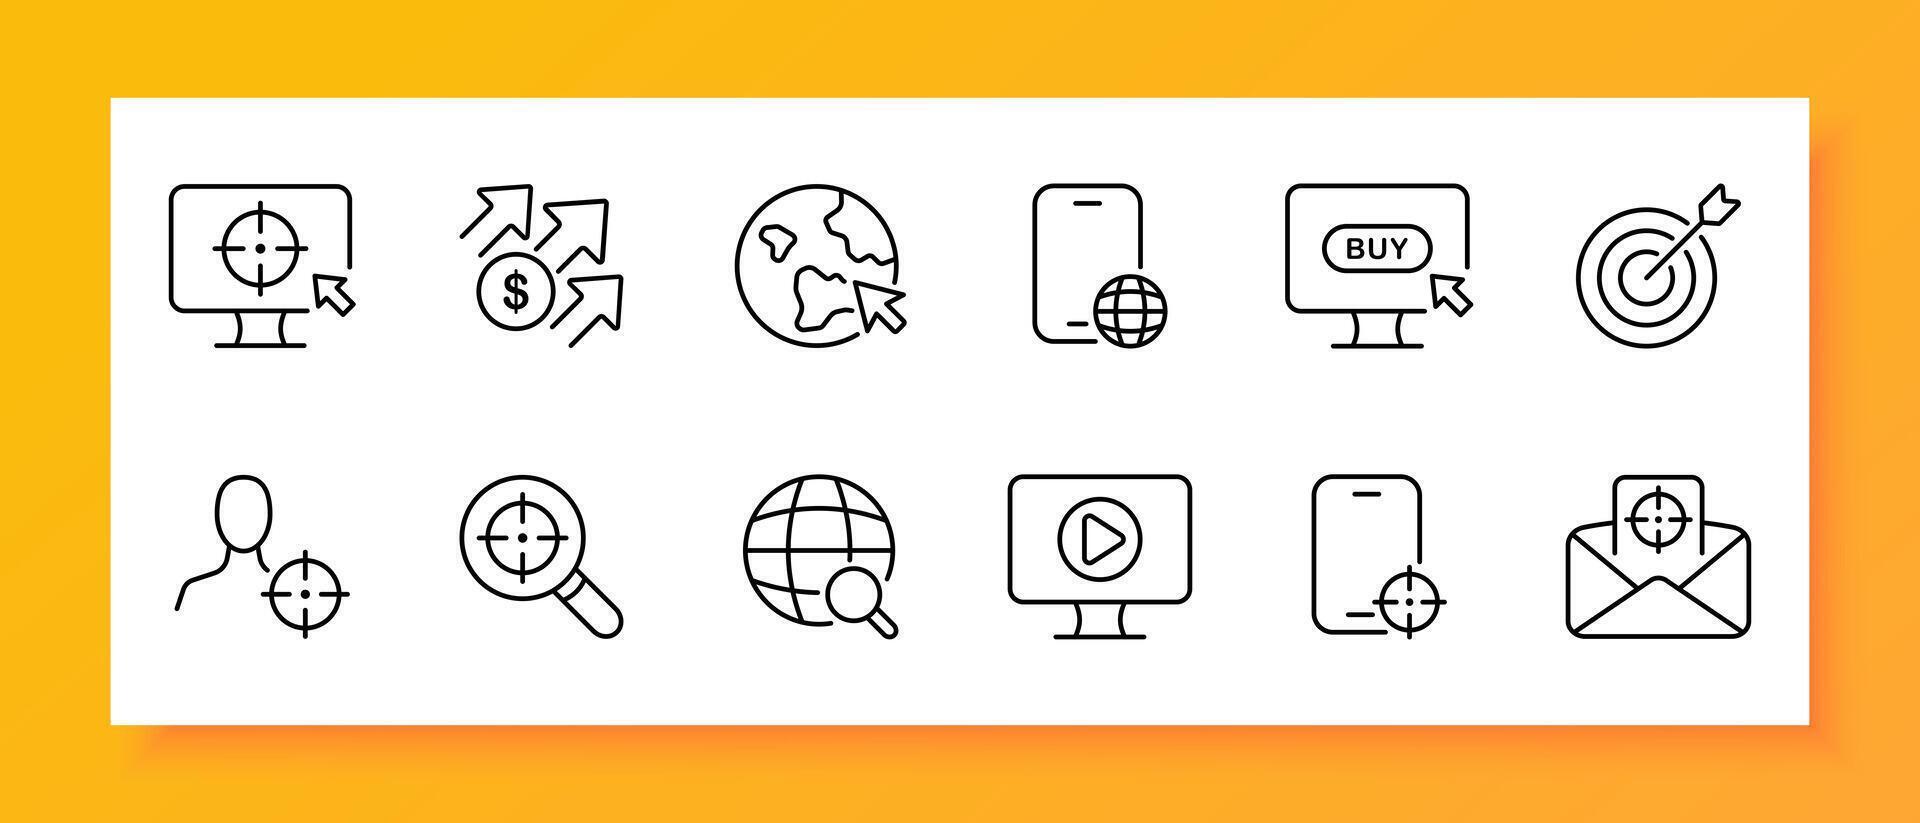 Advertising icon set. Target audience, monitor, dollar, purchase, planet, video hosting, mail, smartphone. Black icon on a white background. Vector line icon for business and advertising